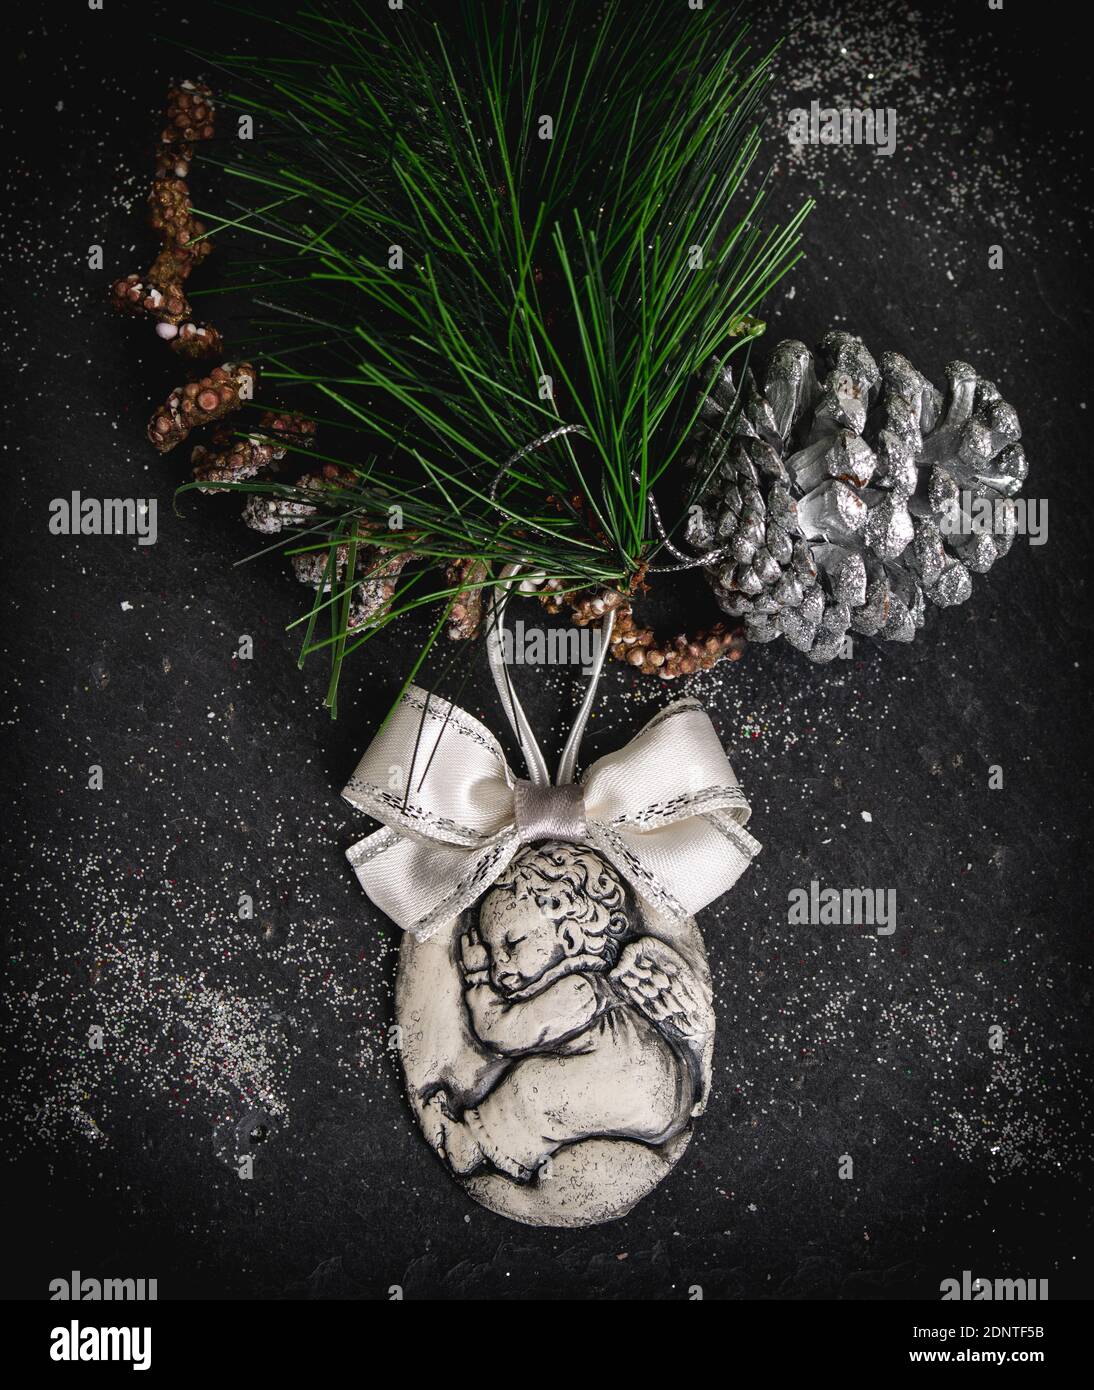 Rustic Christmas decoration with an ornament, pinecone and fir branch Stock Photo